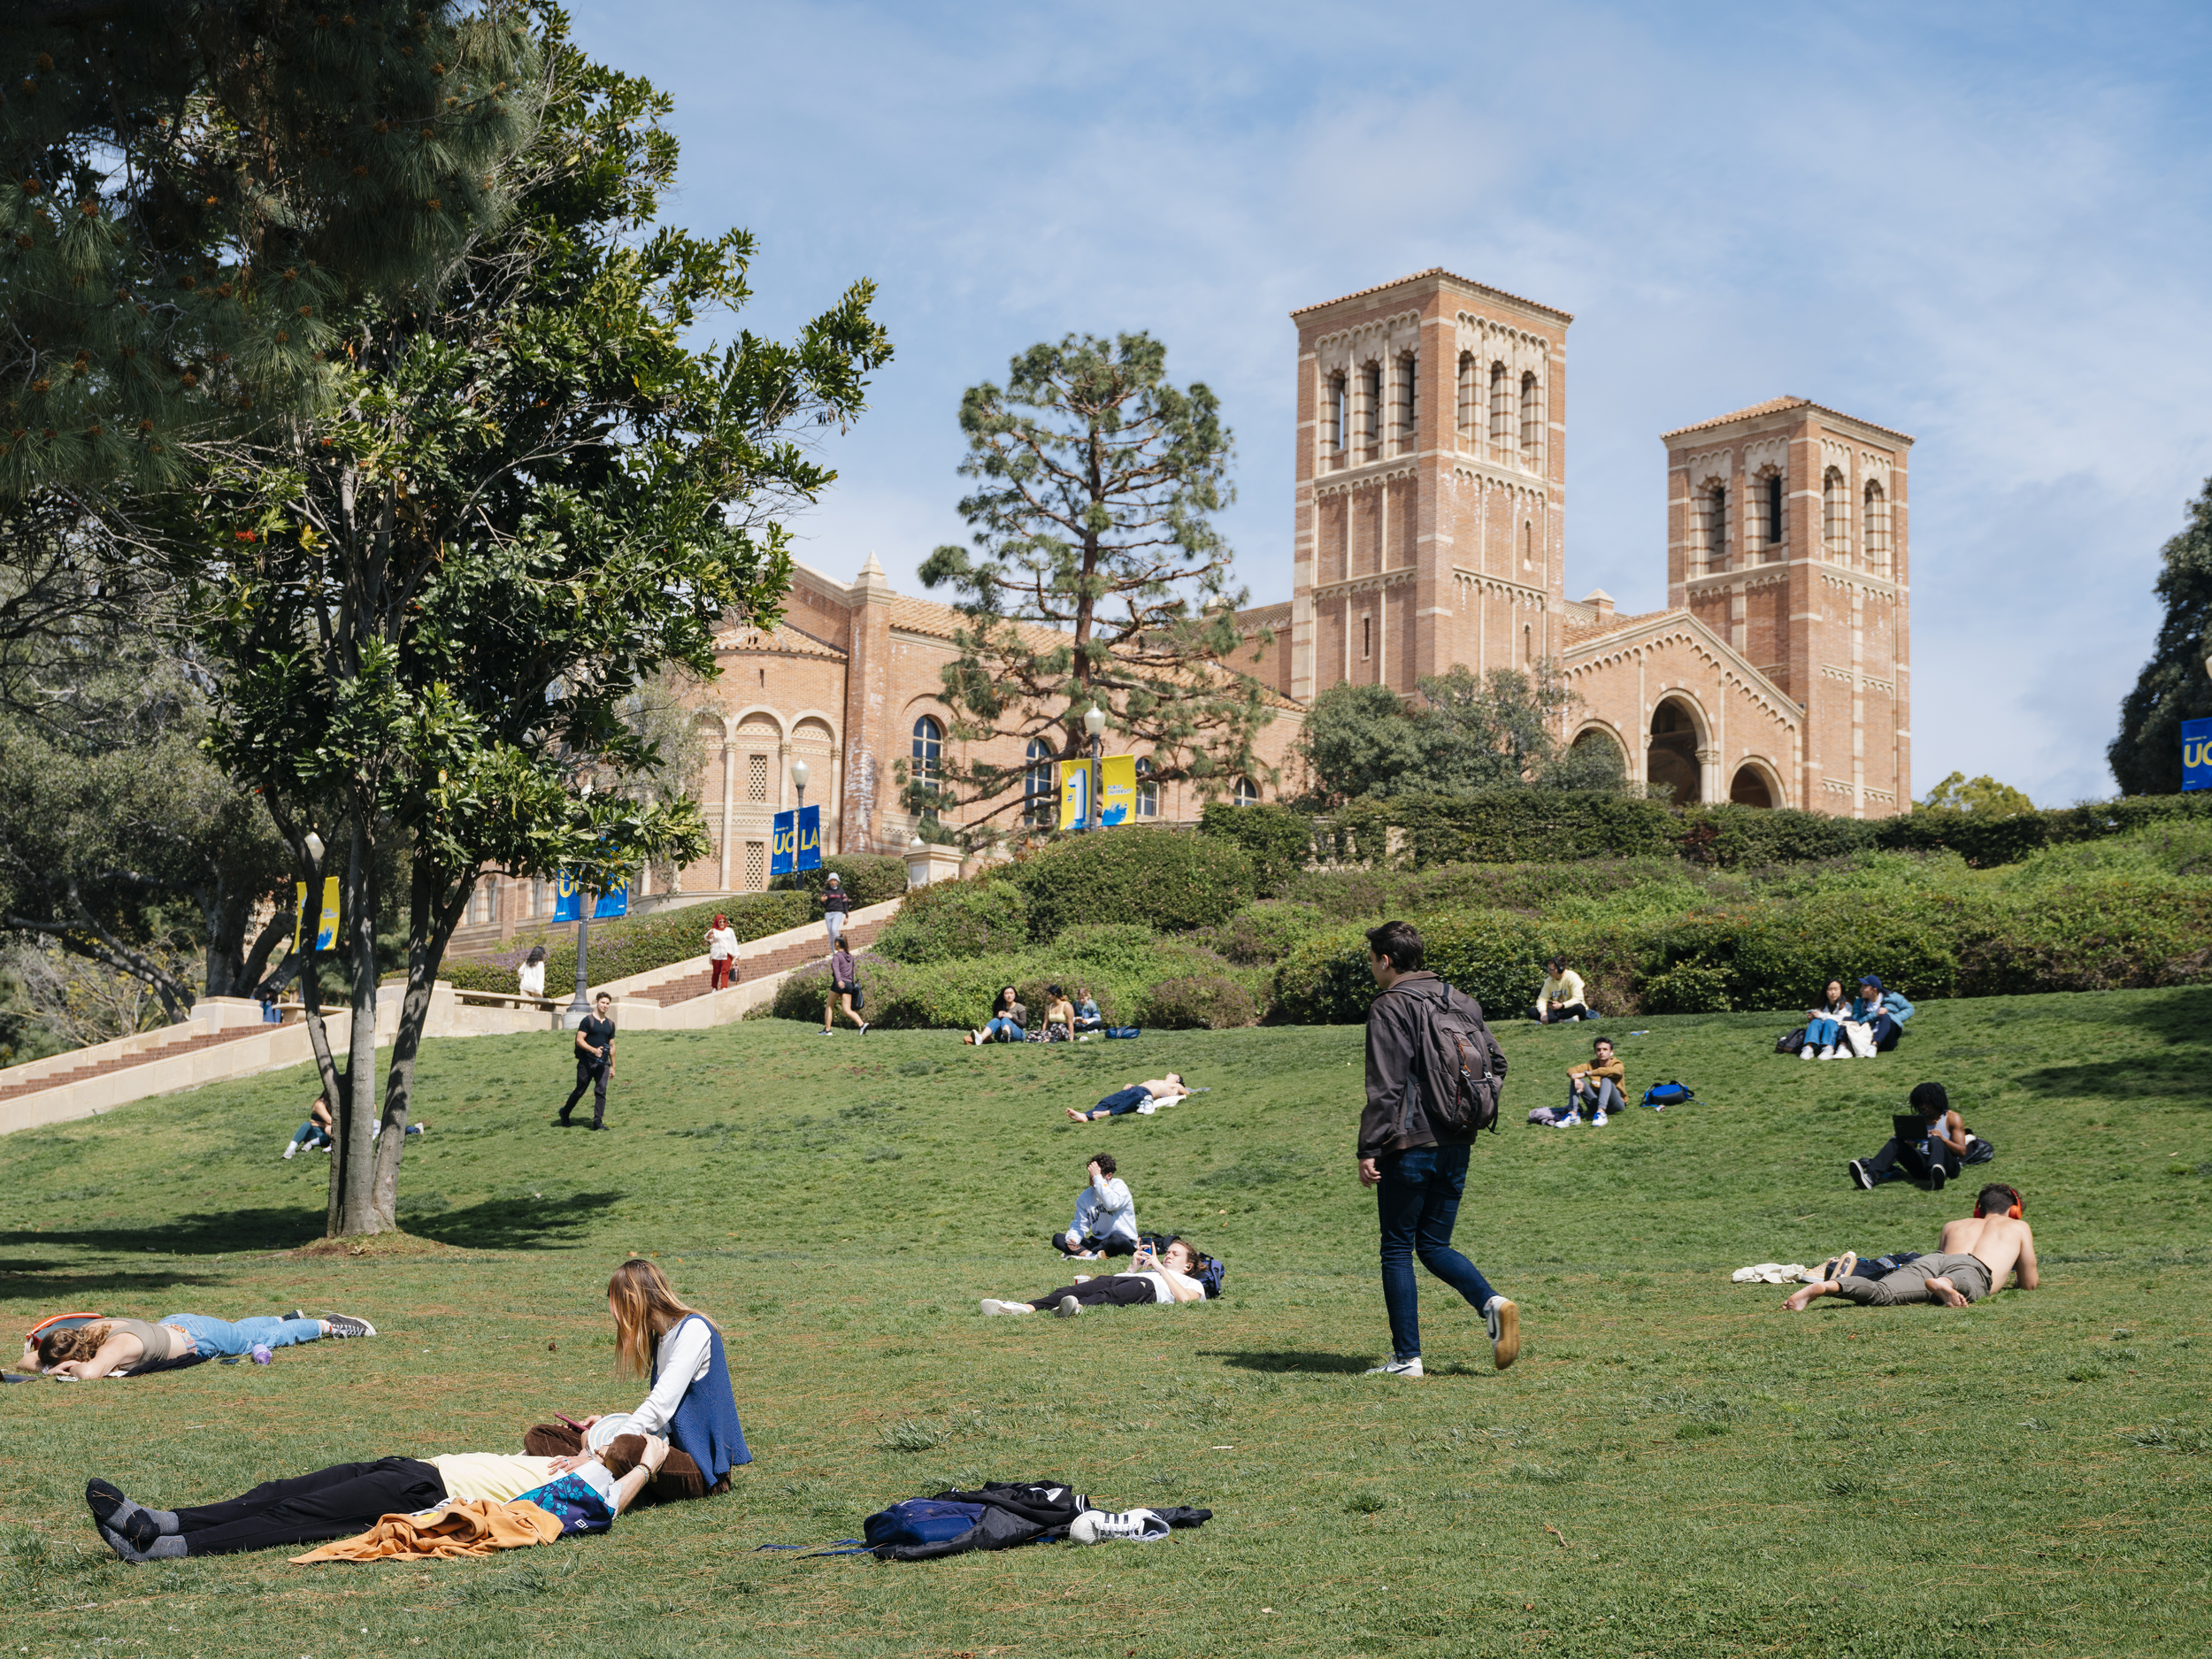 Students lounge and walk across the green on a sunny day at the UCLA campus; Royce Hall in the background